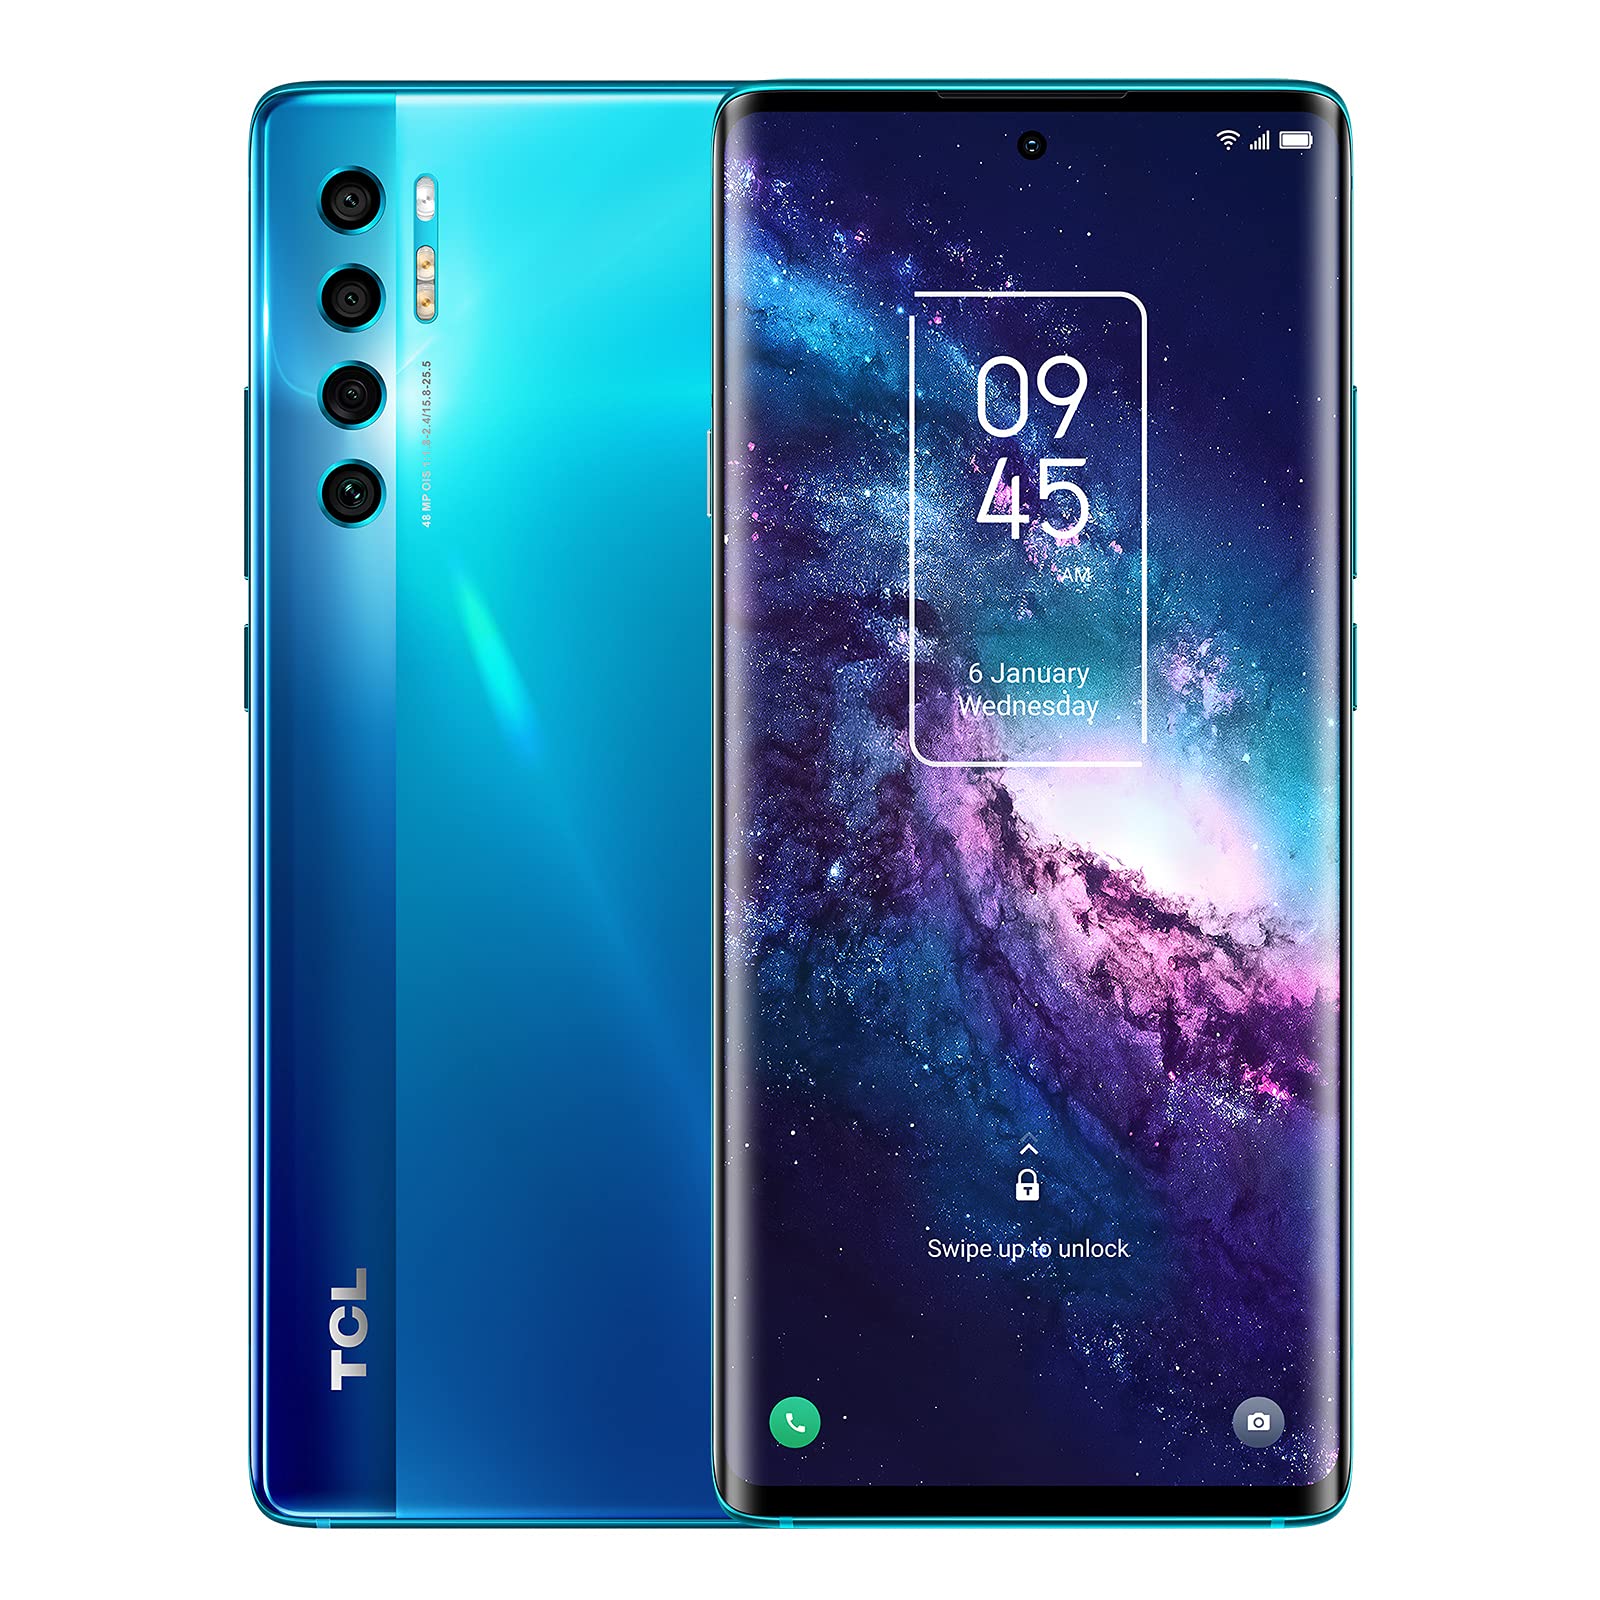 TCL 20 Pro 5G Unlocked Smartphone with 6.67 inch AMOLED FHD+ Display, 48MP OIS Quad Camera, 6GB+256GB, 4500mAh Battery, US 5G Verizon Cellphone, Marine Blue, Does not Support AT&T 5G